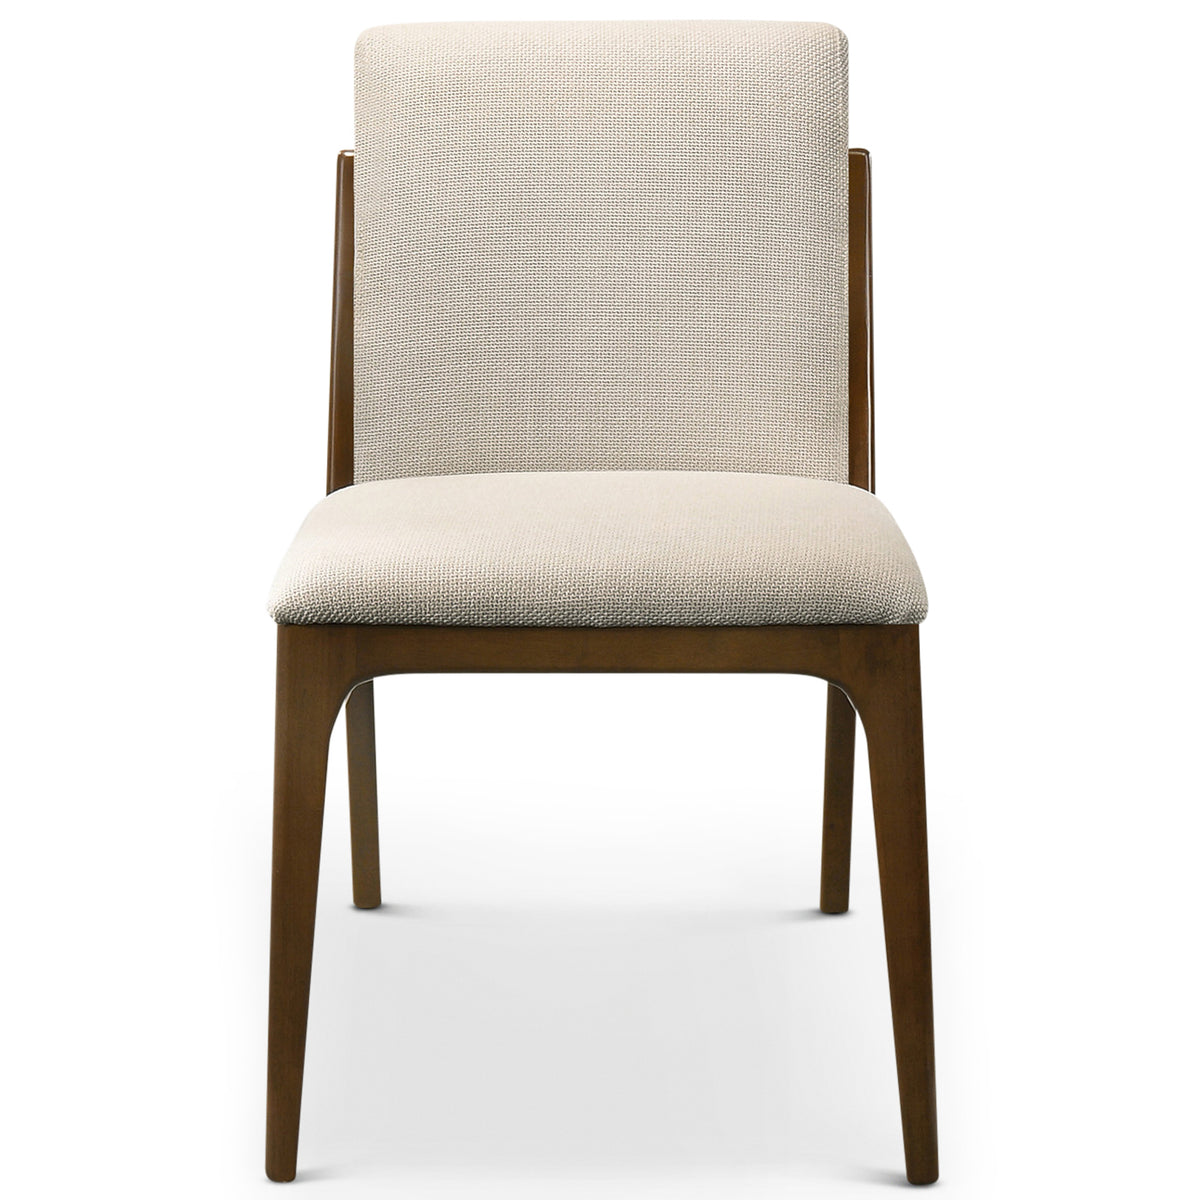 Griffin Cream Fabric Dining Chair - MidinMod Houston Tx Mid Century Furniture Store - Dining Chairs 8